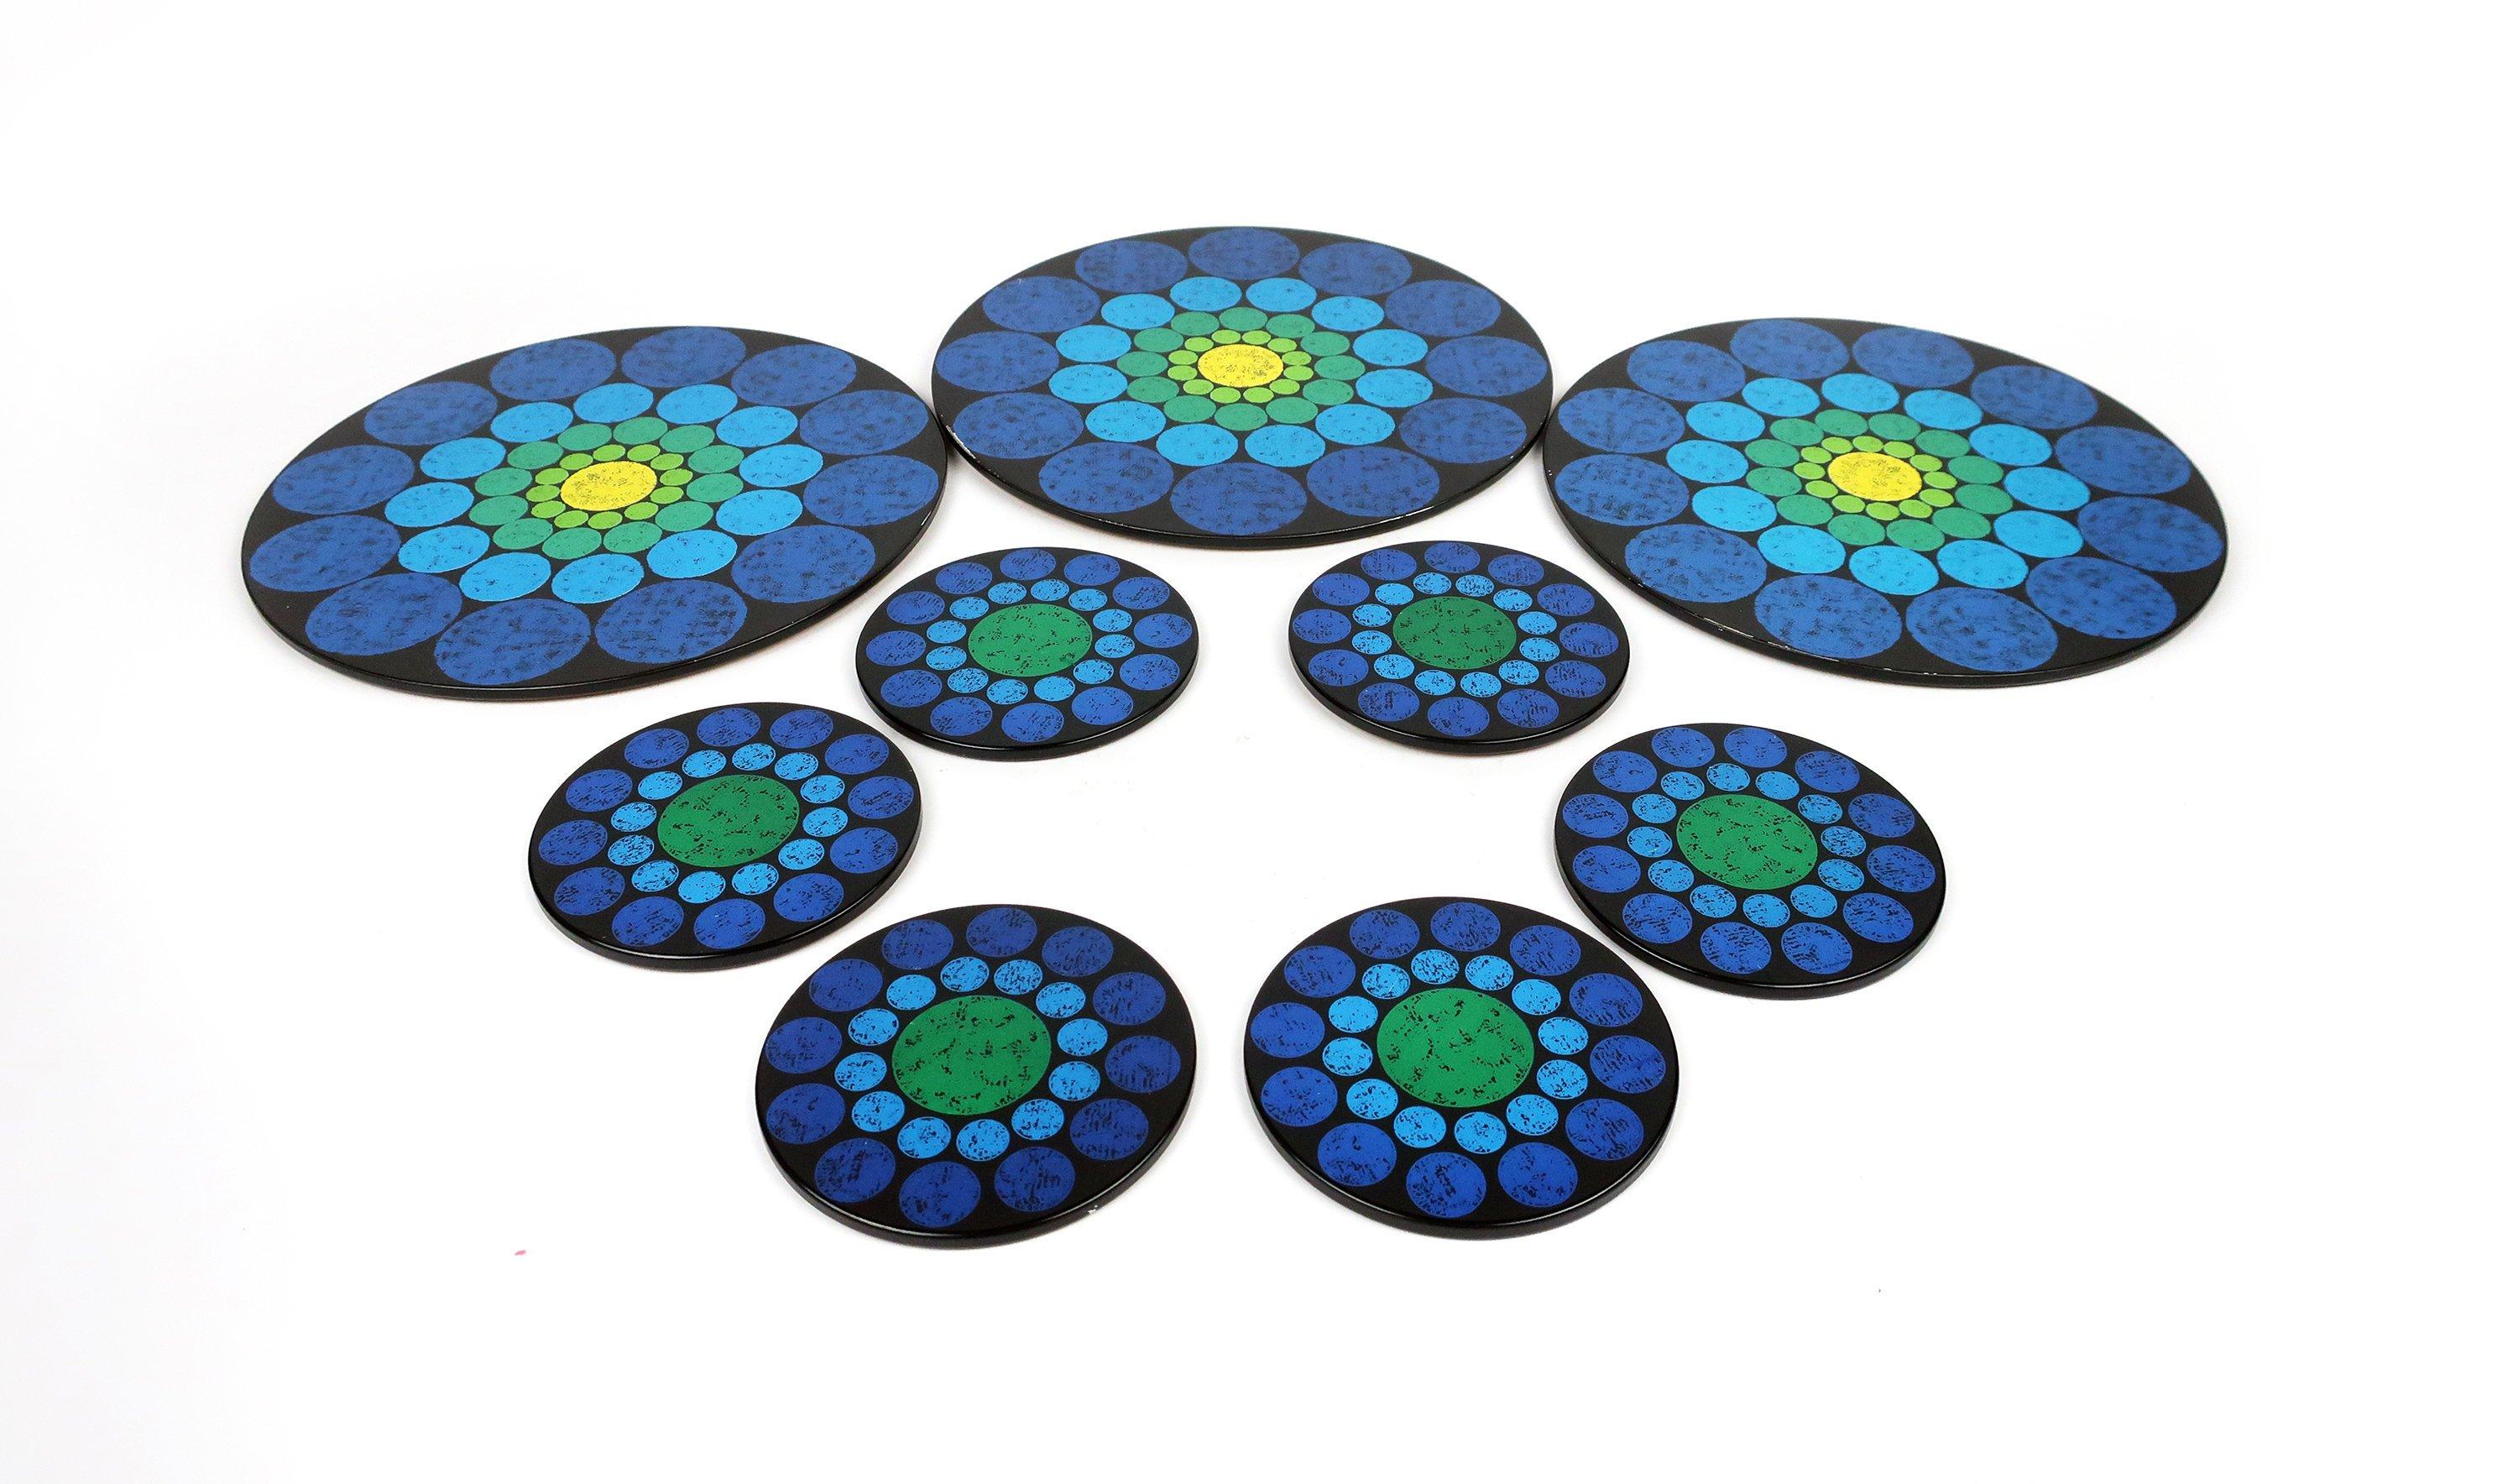 A great set of late 1960s-early 1970s Worcester Ware coasters and trivets with a fantastic pattern of multi colored concentric circles in that resemble the pedals of a flower. The six coasters are two shades of blue. The 3 trivets are two shades of